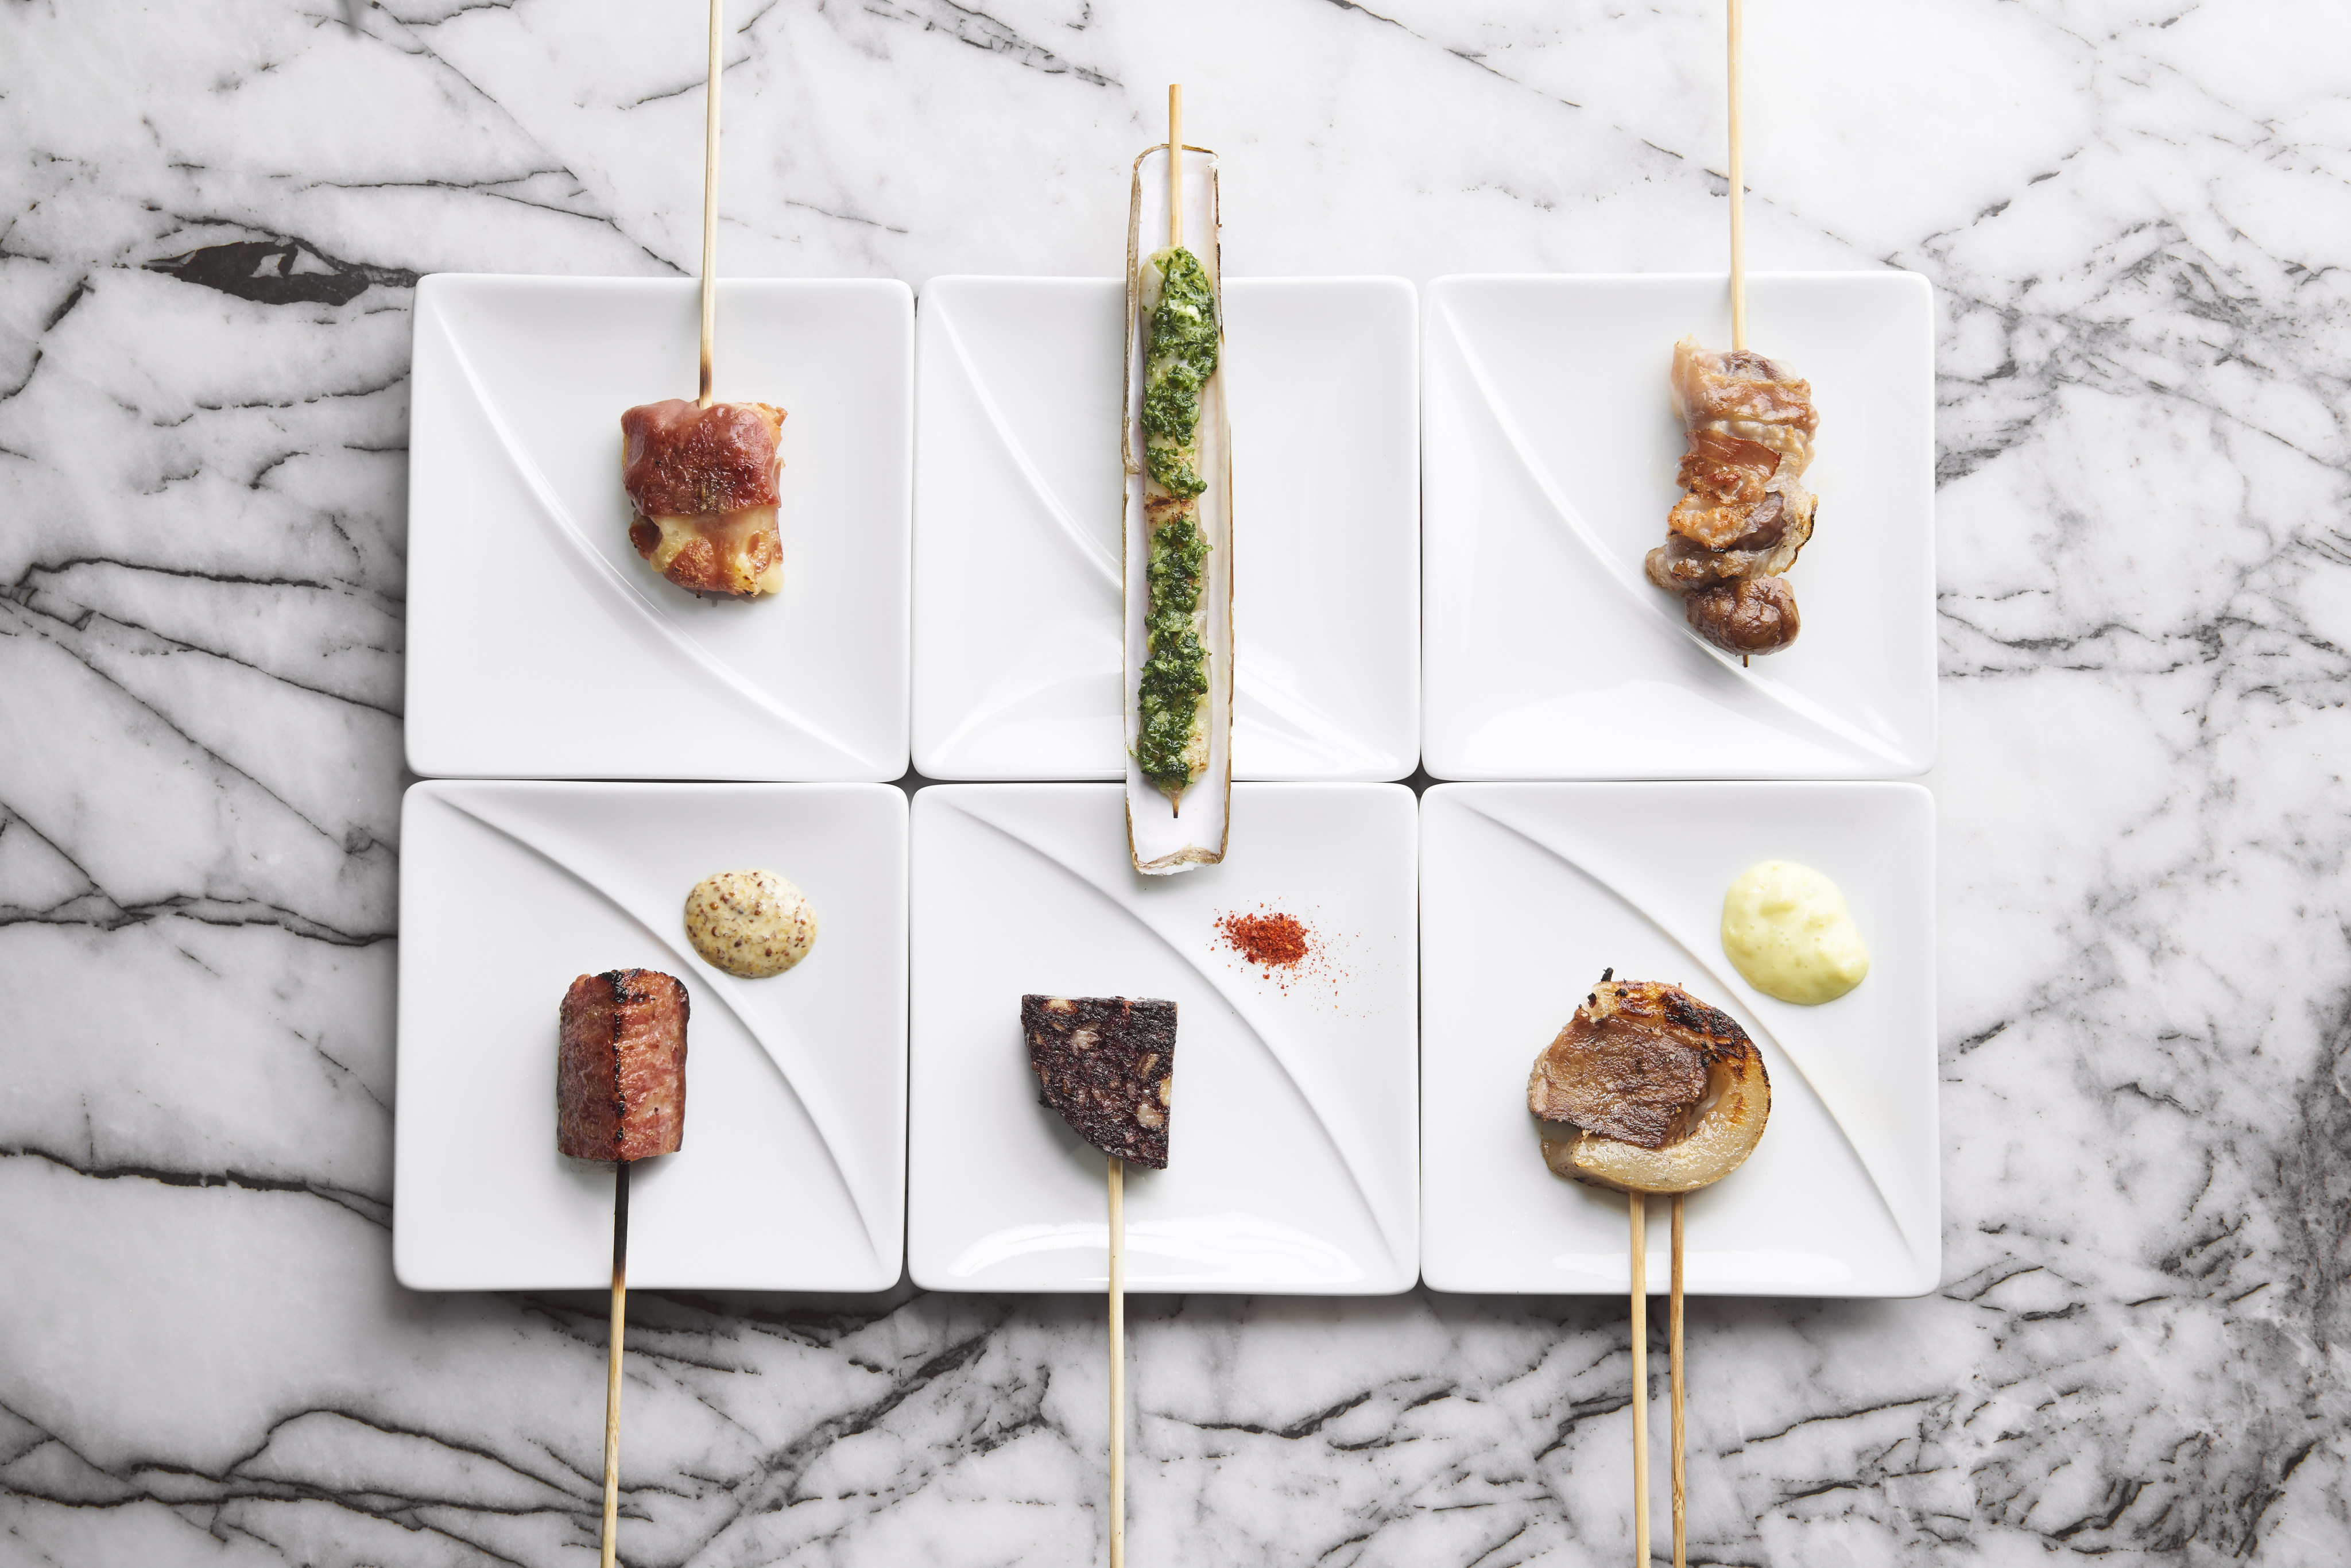 Yakifrenchy skewers. Photo: Clarence